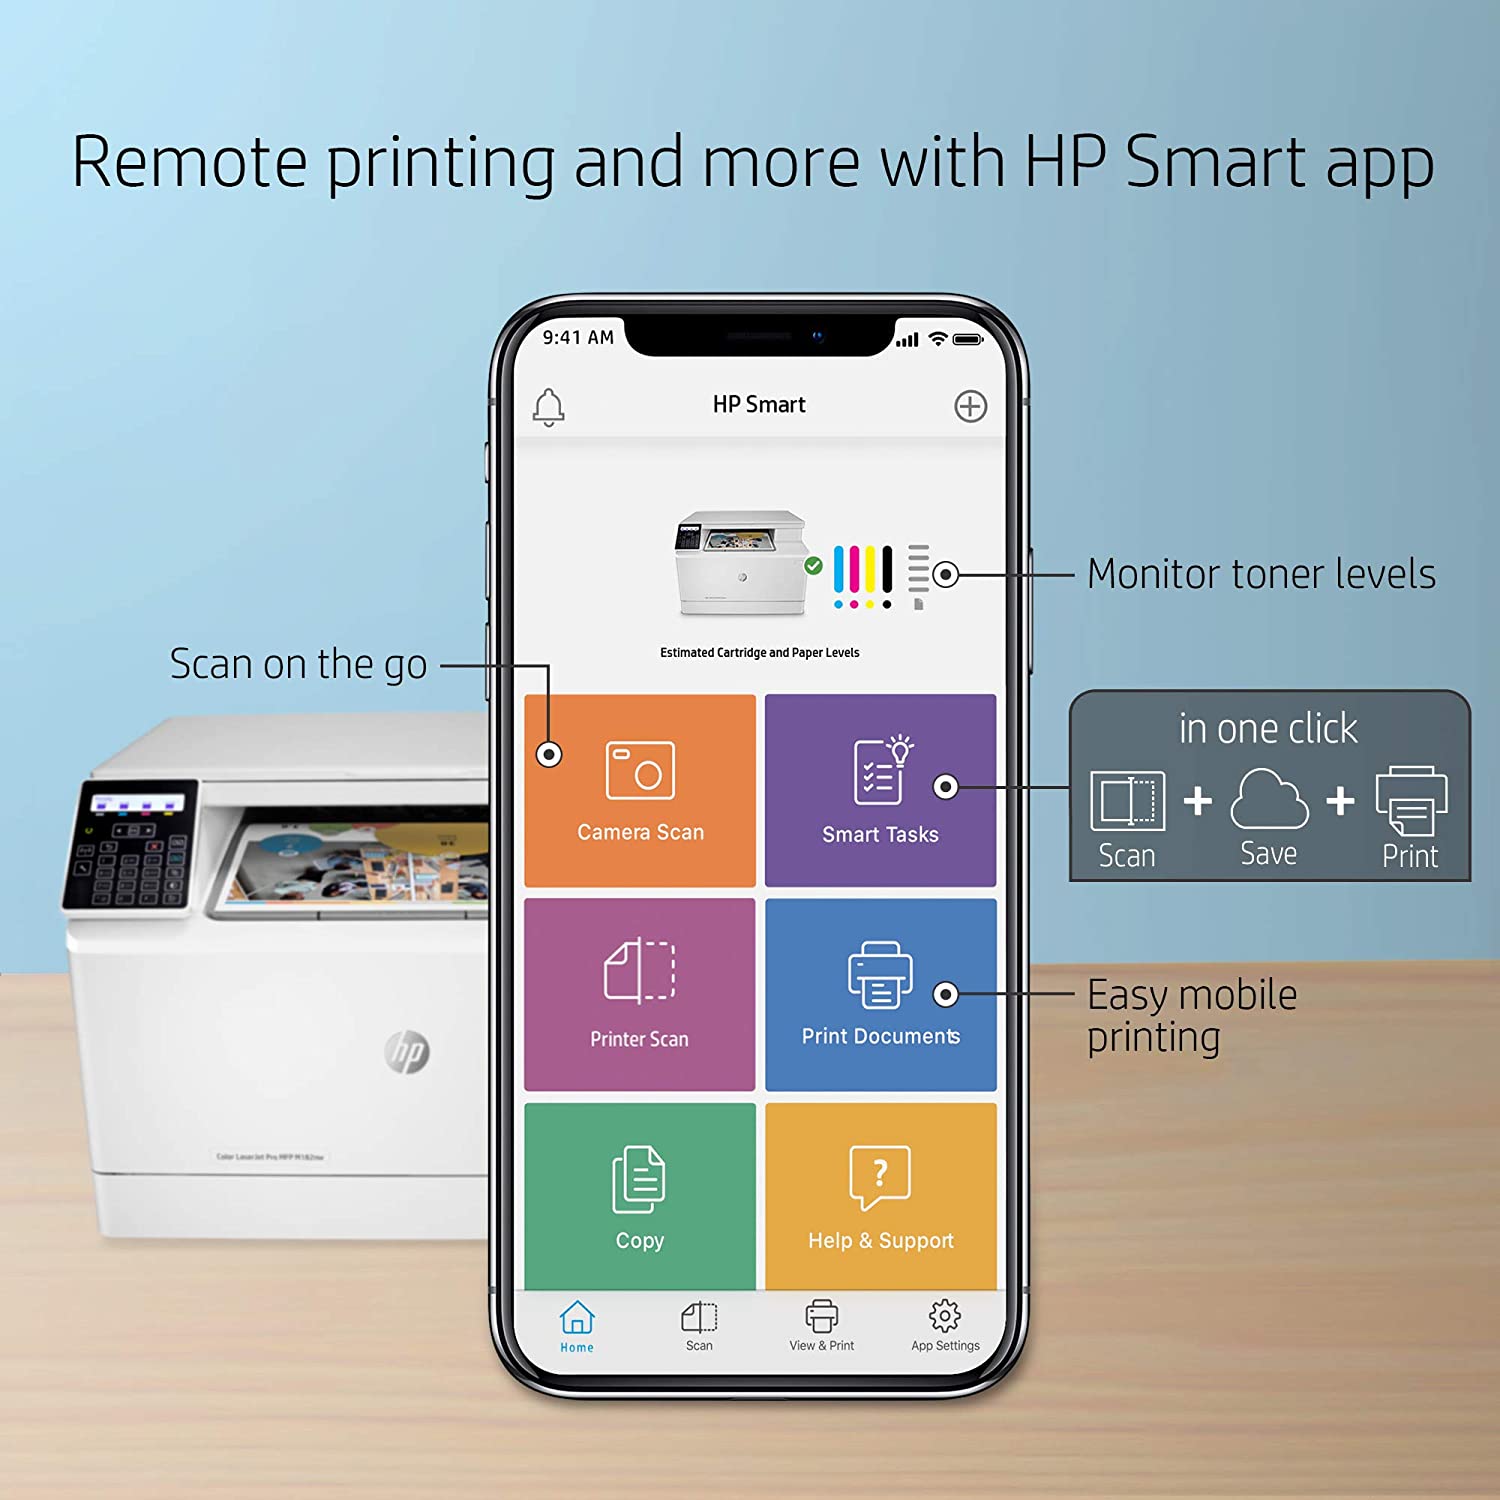 Hp Color Laserjet Pro M182Nw Wireless All-In-One Laser Printer, Print, Scan & Copy